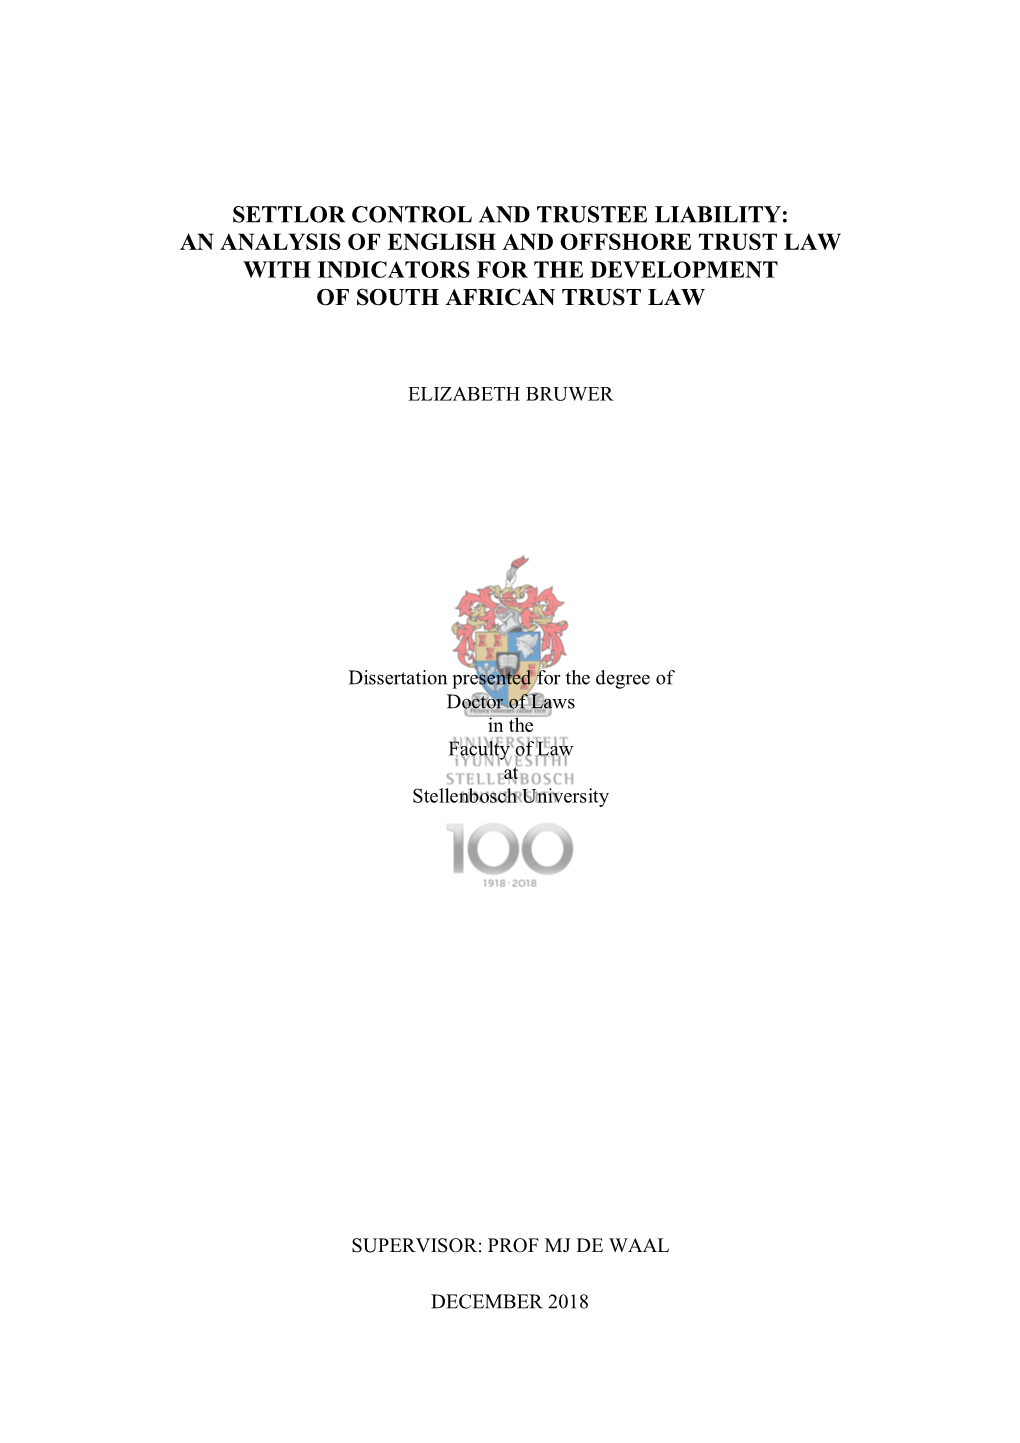 Settlor Control and Trustee Liability: an Analysis of English and Offshore Trust Law with Indicators for the Development of South African Trust Law